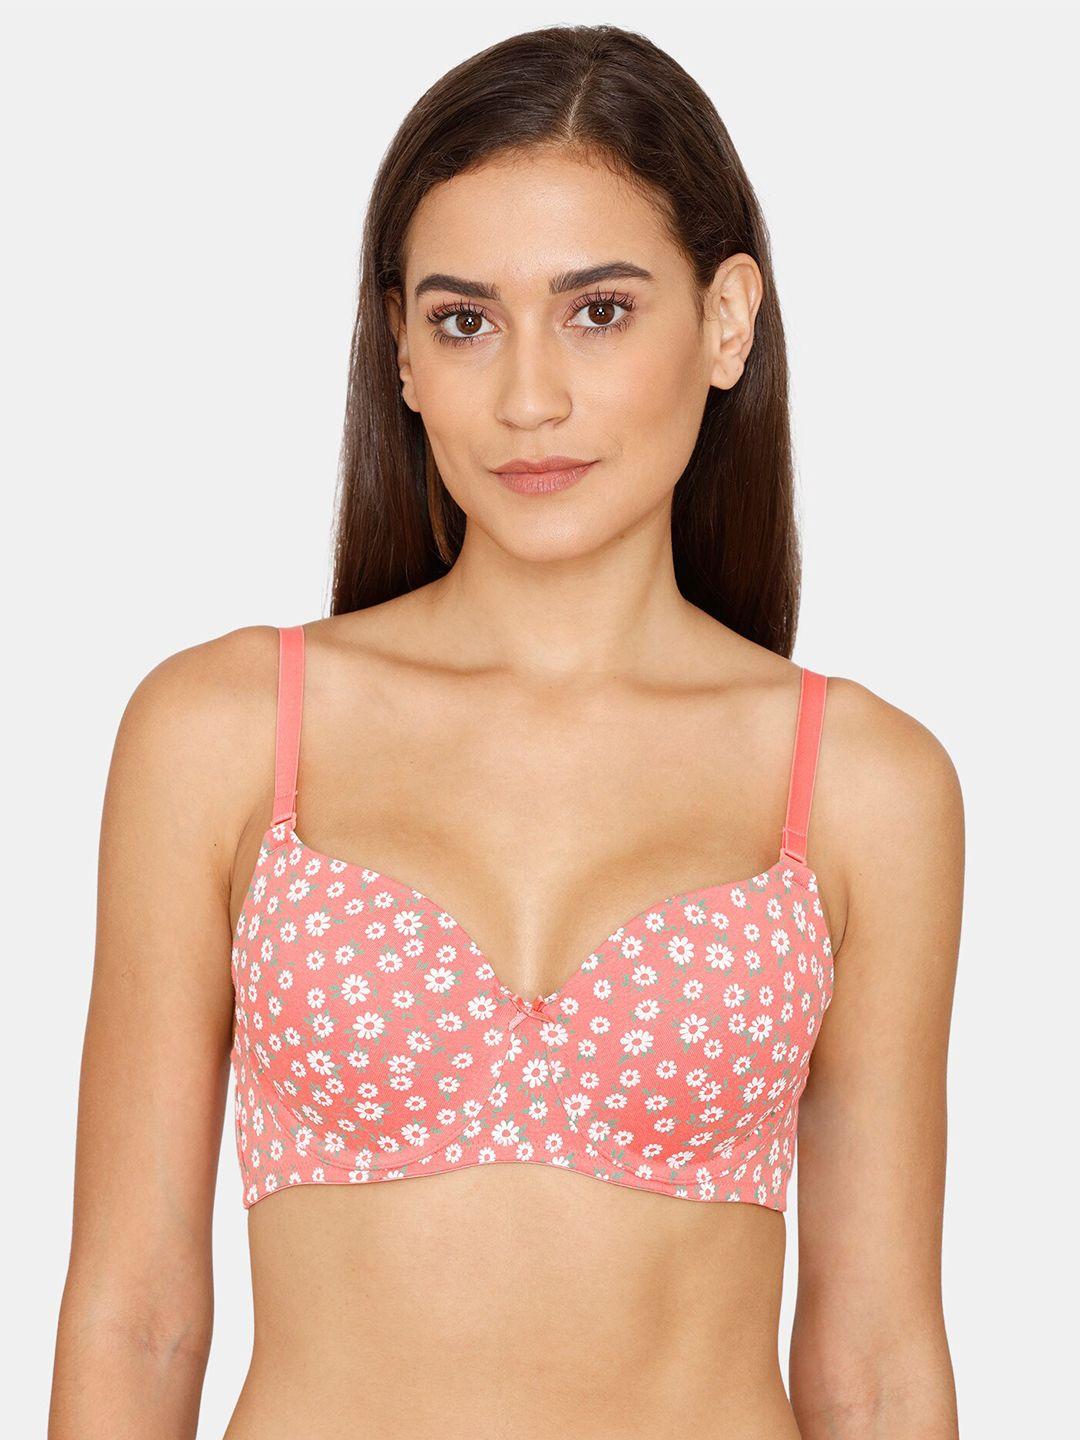 rosaline by zivame peach-coloured & white floral bra underwired lightly padded